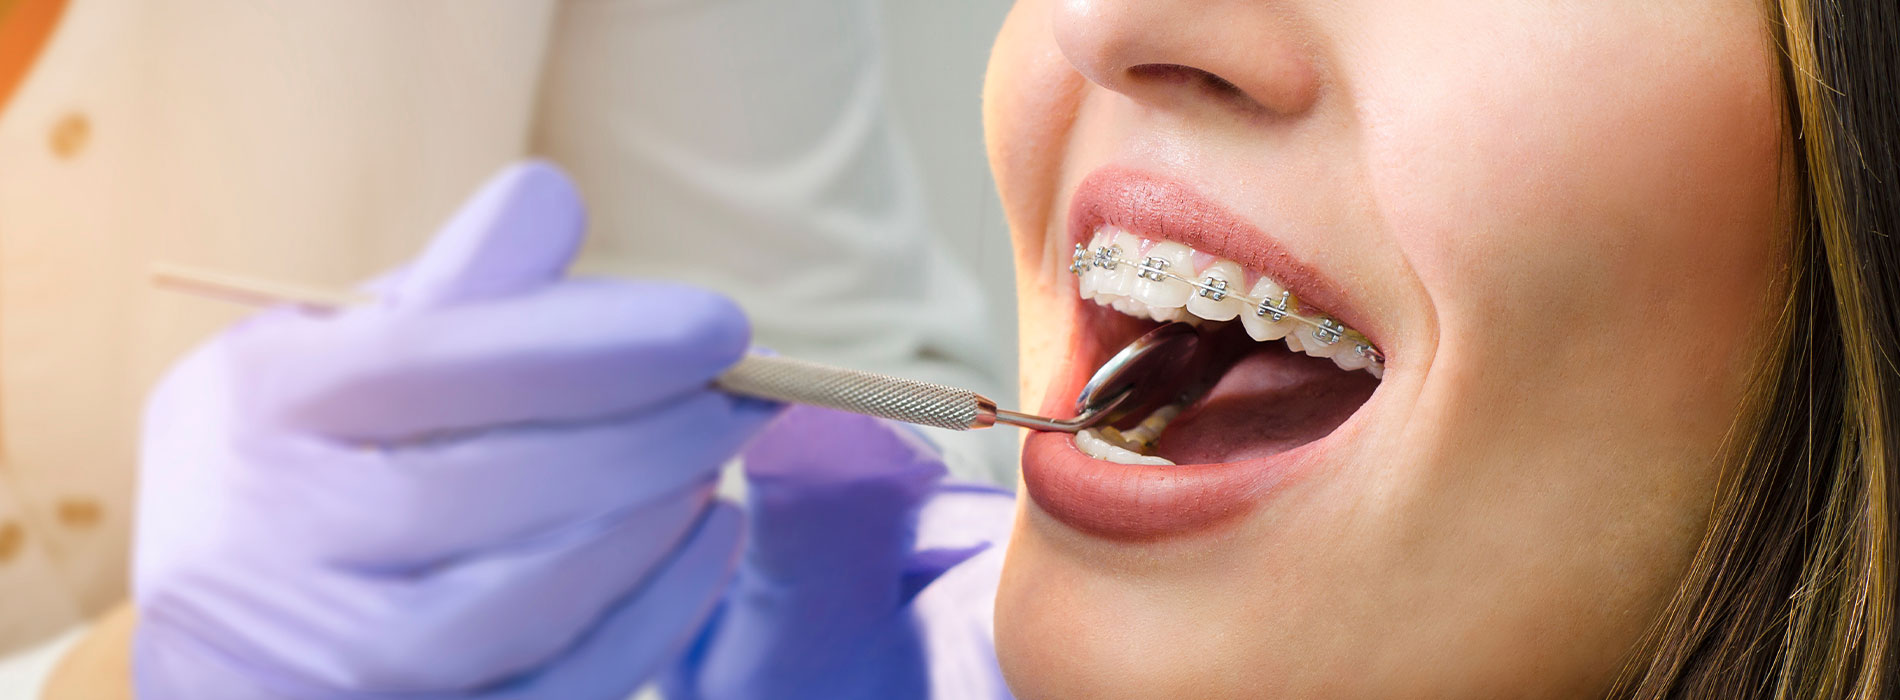 The image shows a person receiving dental treatment, with a focus on the dental chair and the dental professional s hands working on the patient s mouth.